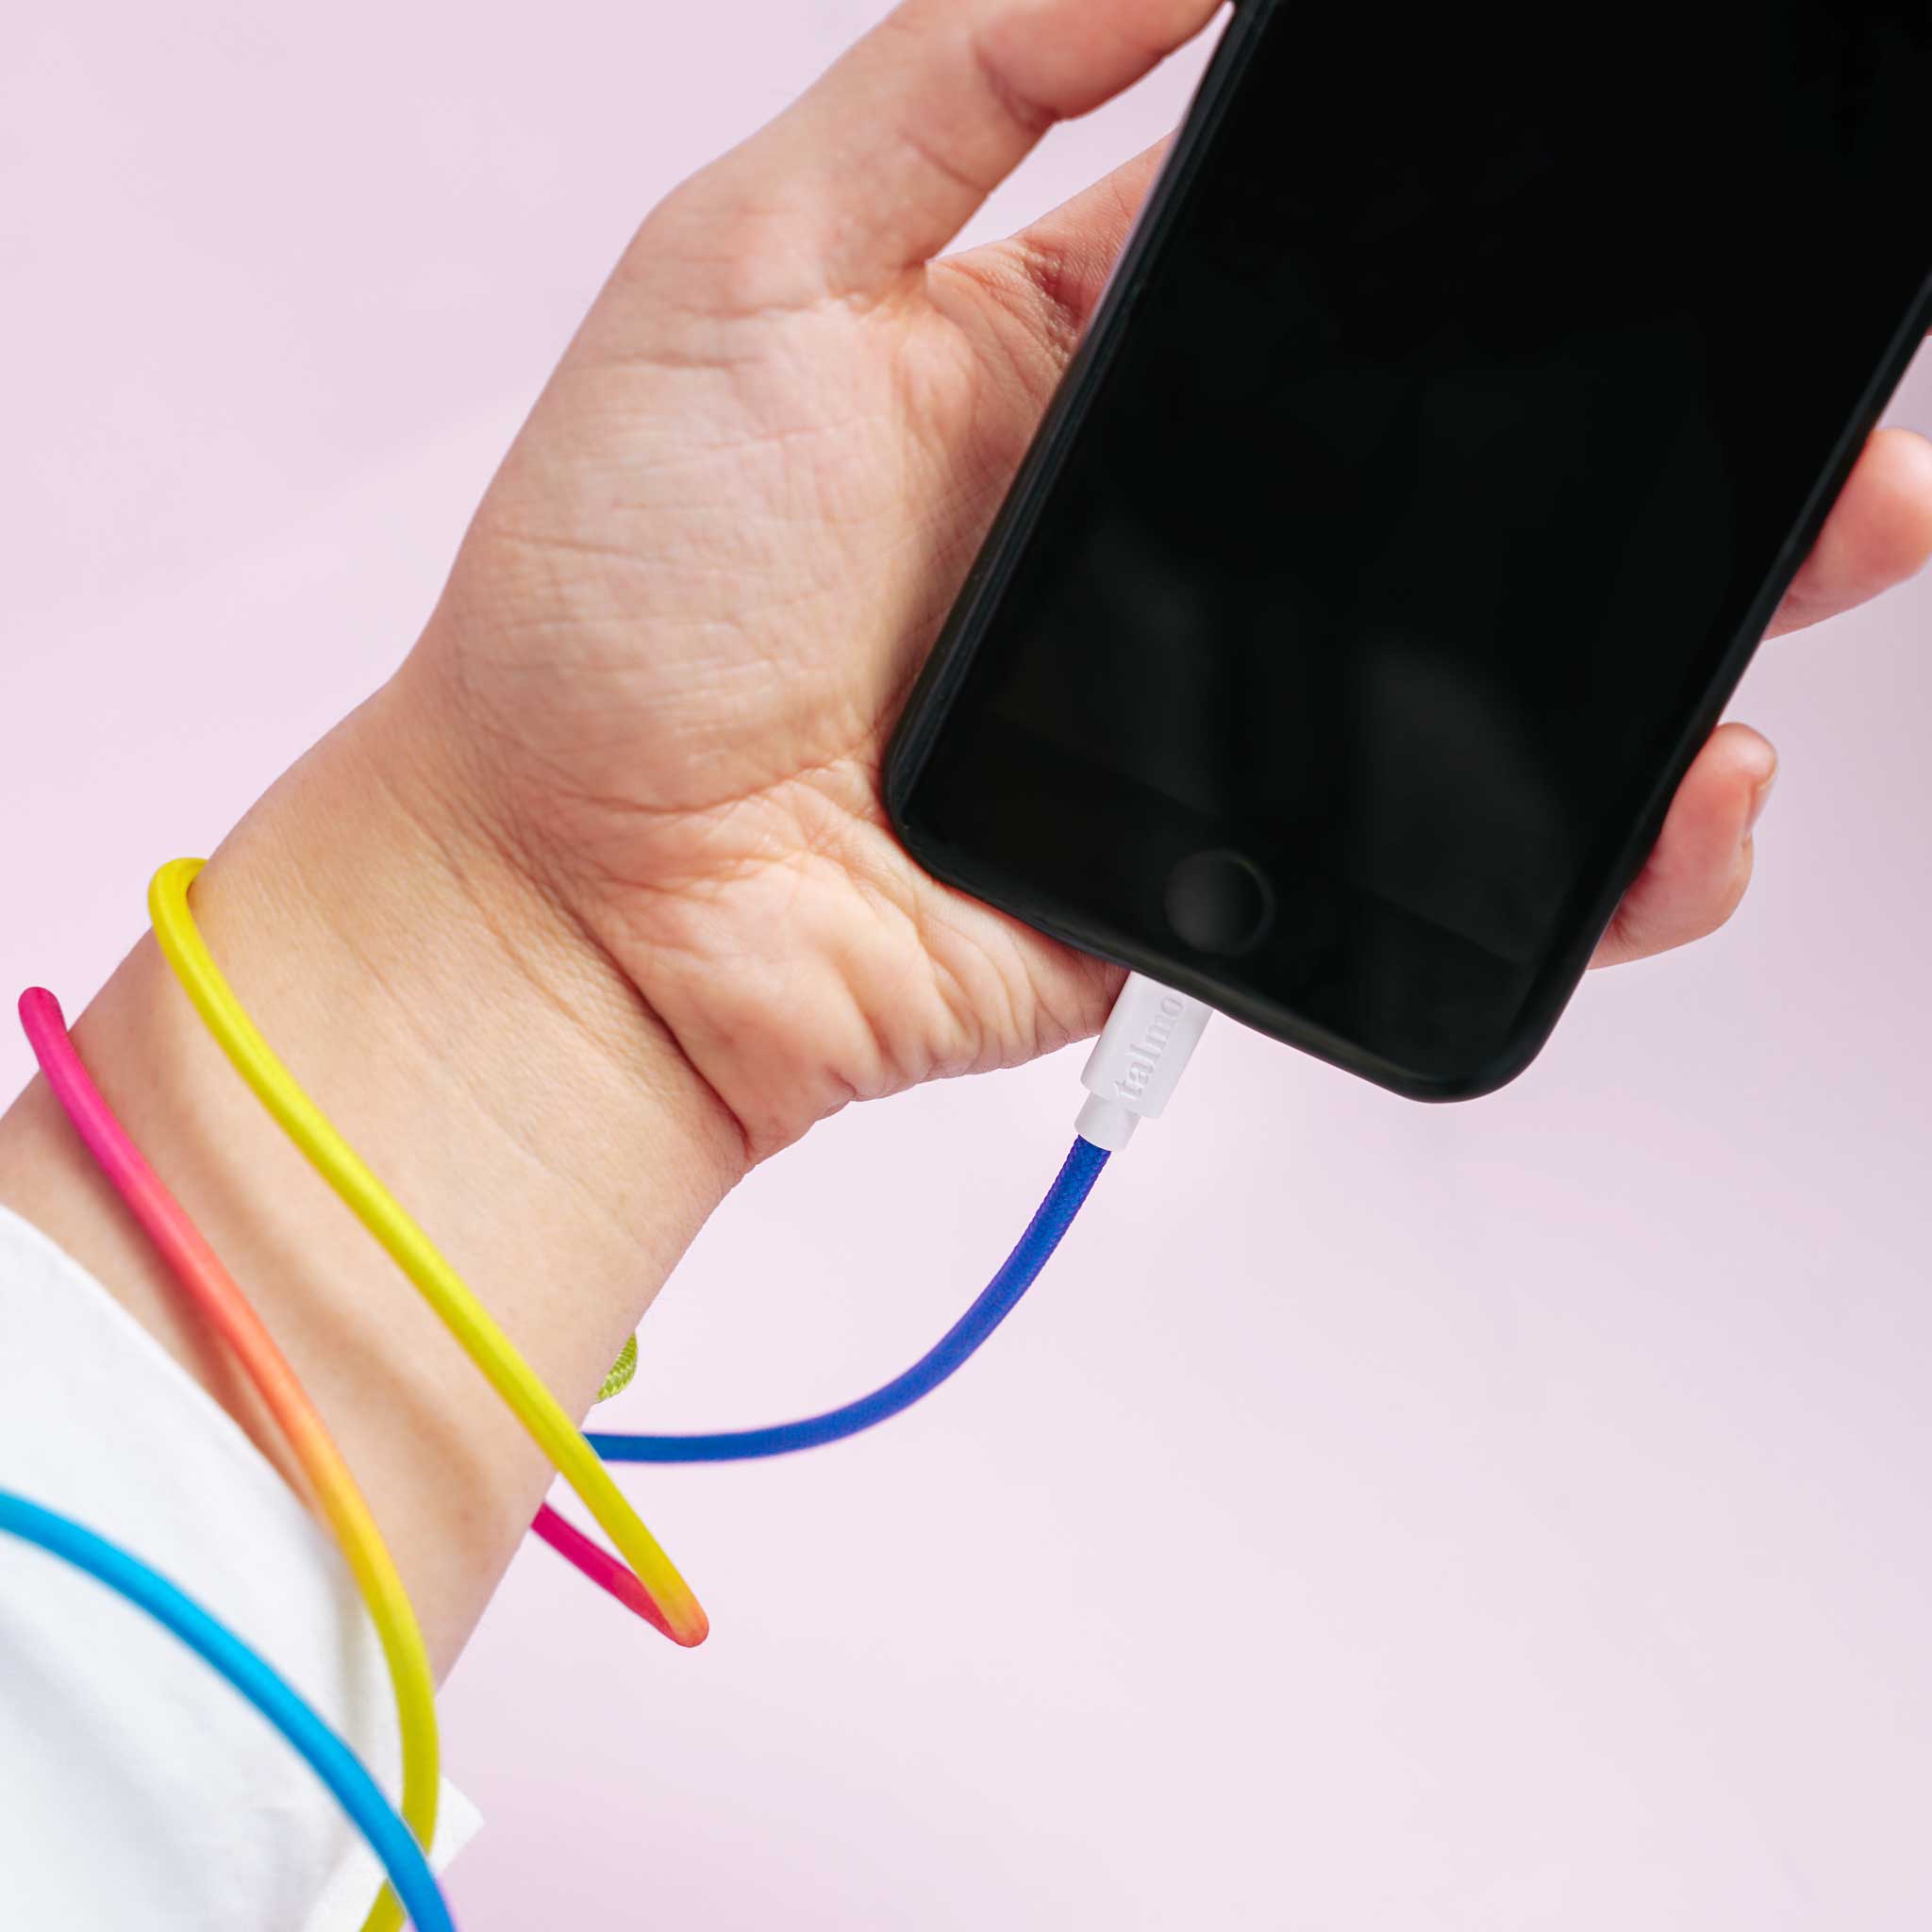 iPHONE USB to LIGHTNING textile CONNECTING & CHARGING CABLE | 100cm | RAINBOW | talmo